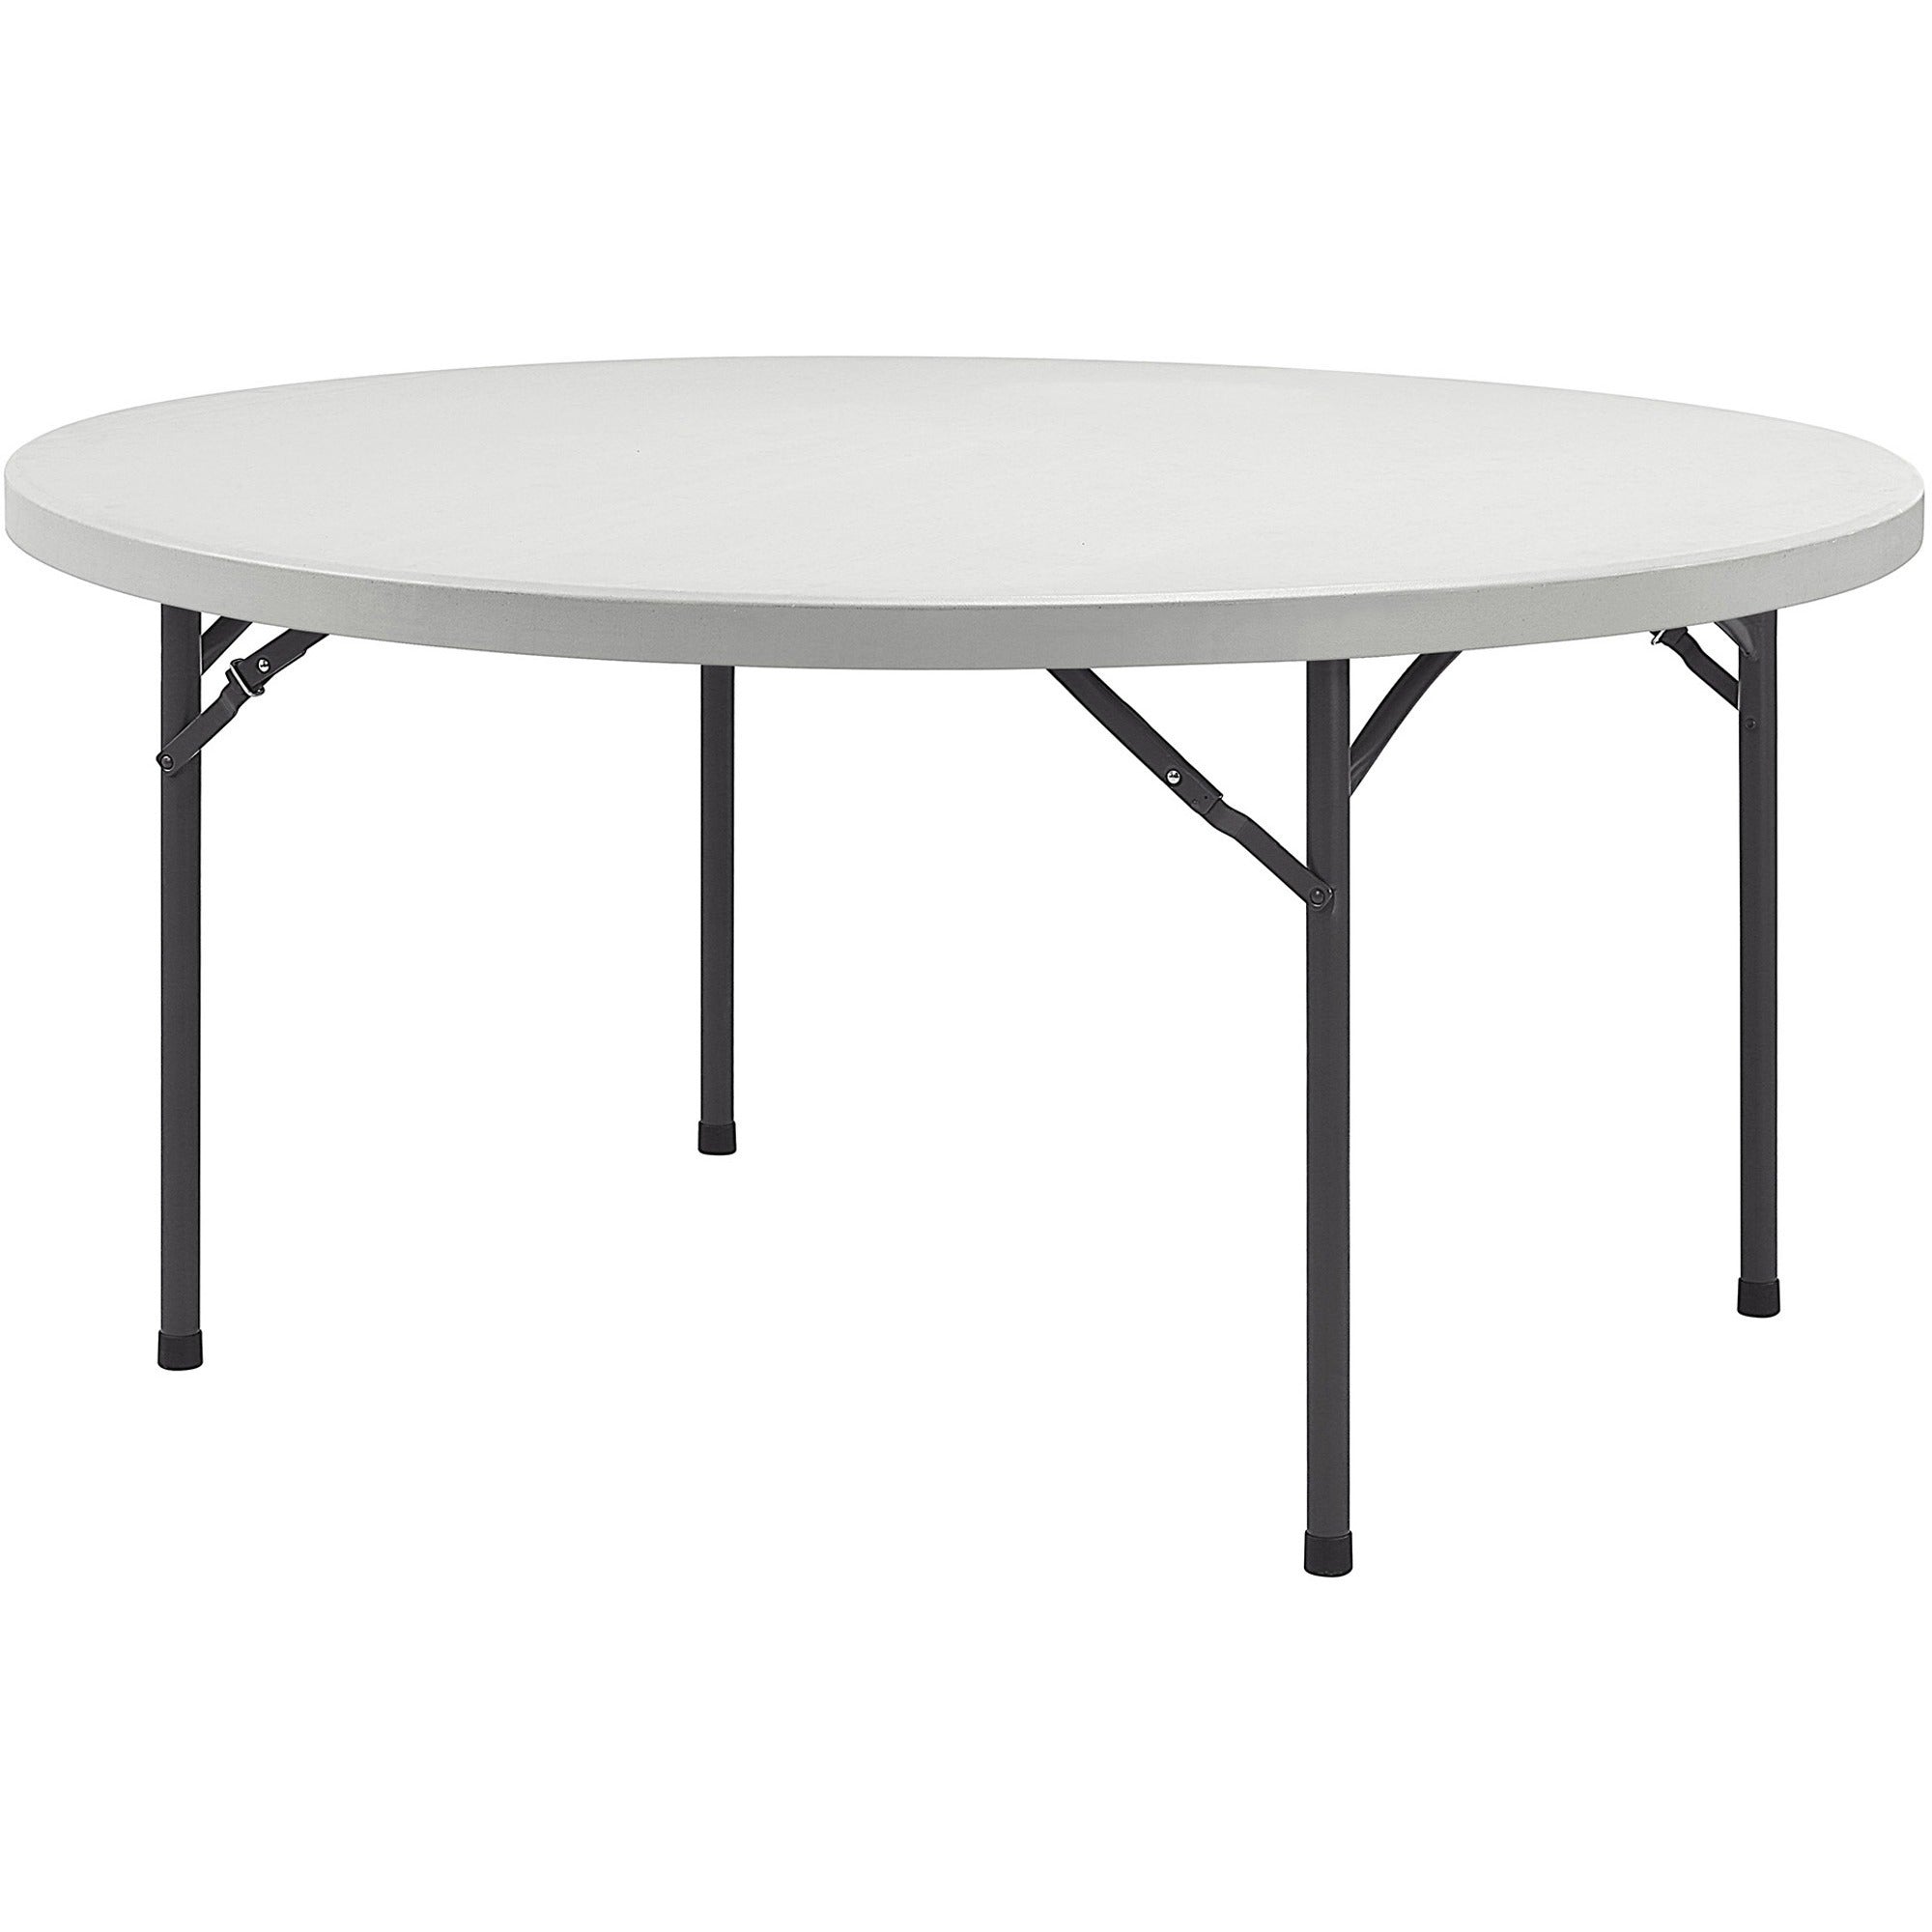 Lorell Ultra-Lite Banquet Folding Table - For - Table TopRound Top - 700 lb Capacity x 60" Table Top Diameter - 29.25" Height - Gray - 1 Each - 